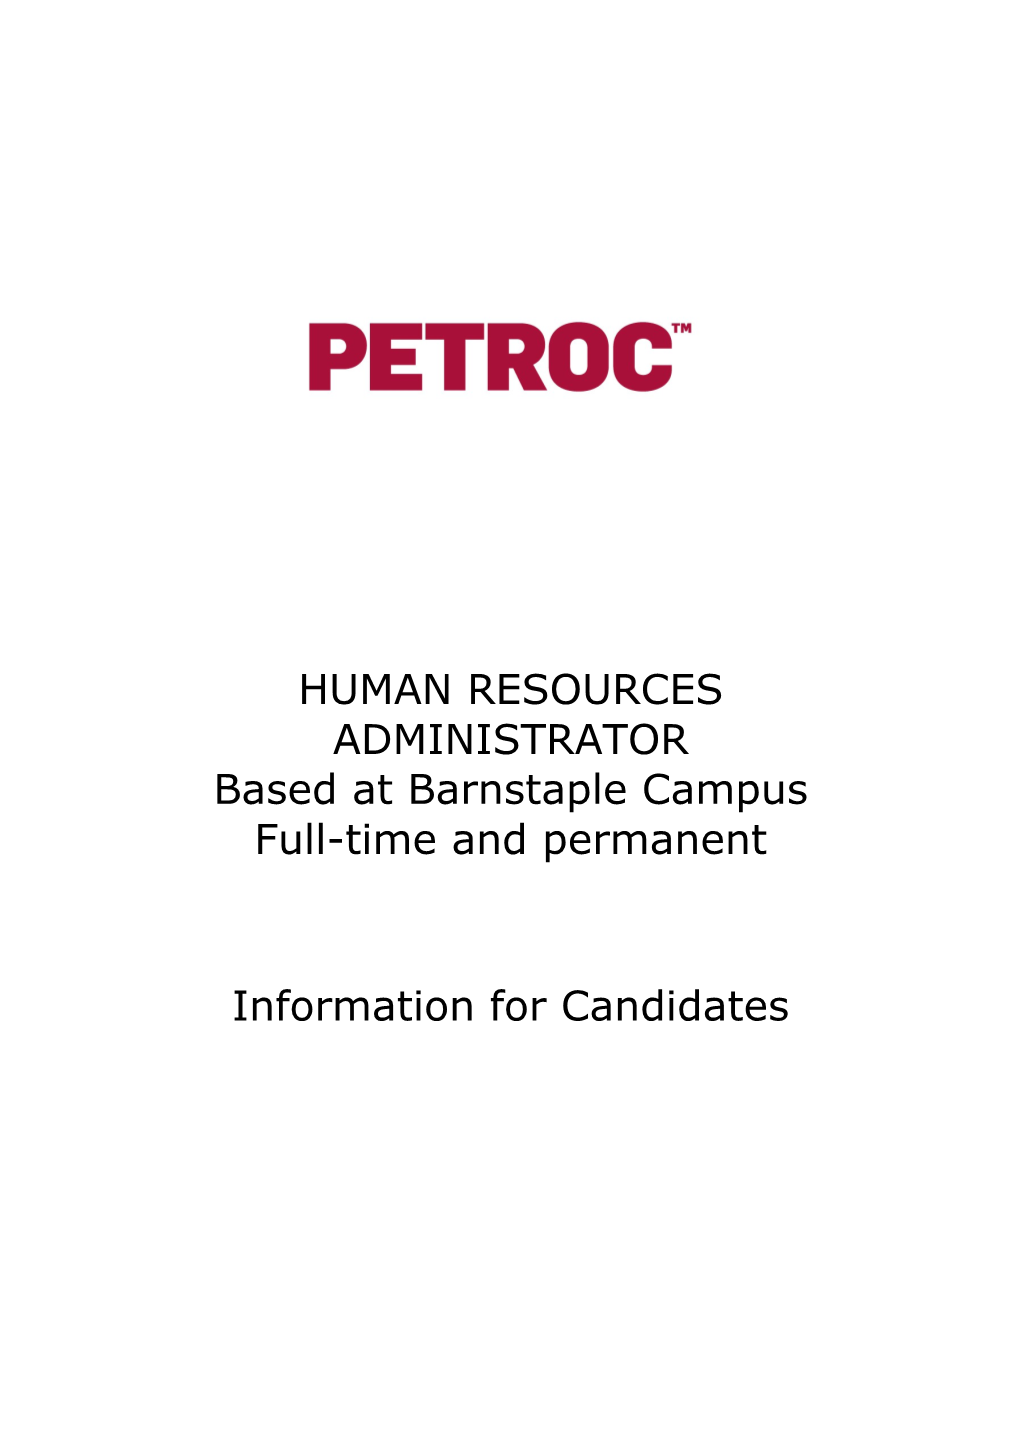 Human Resources Administrator